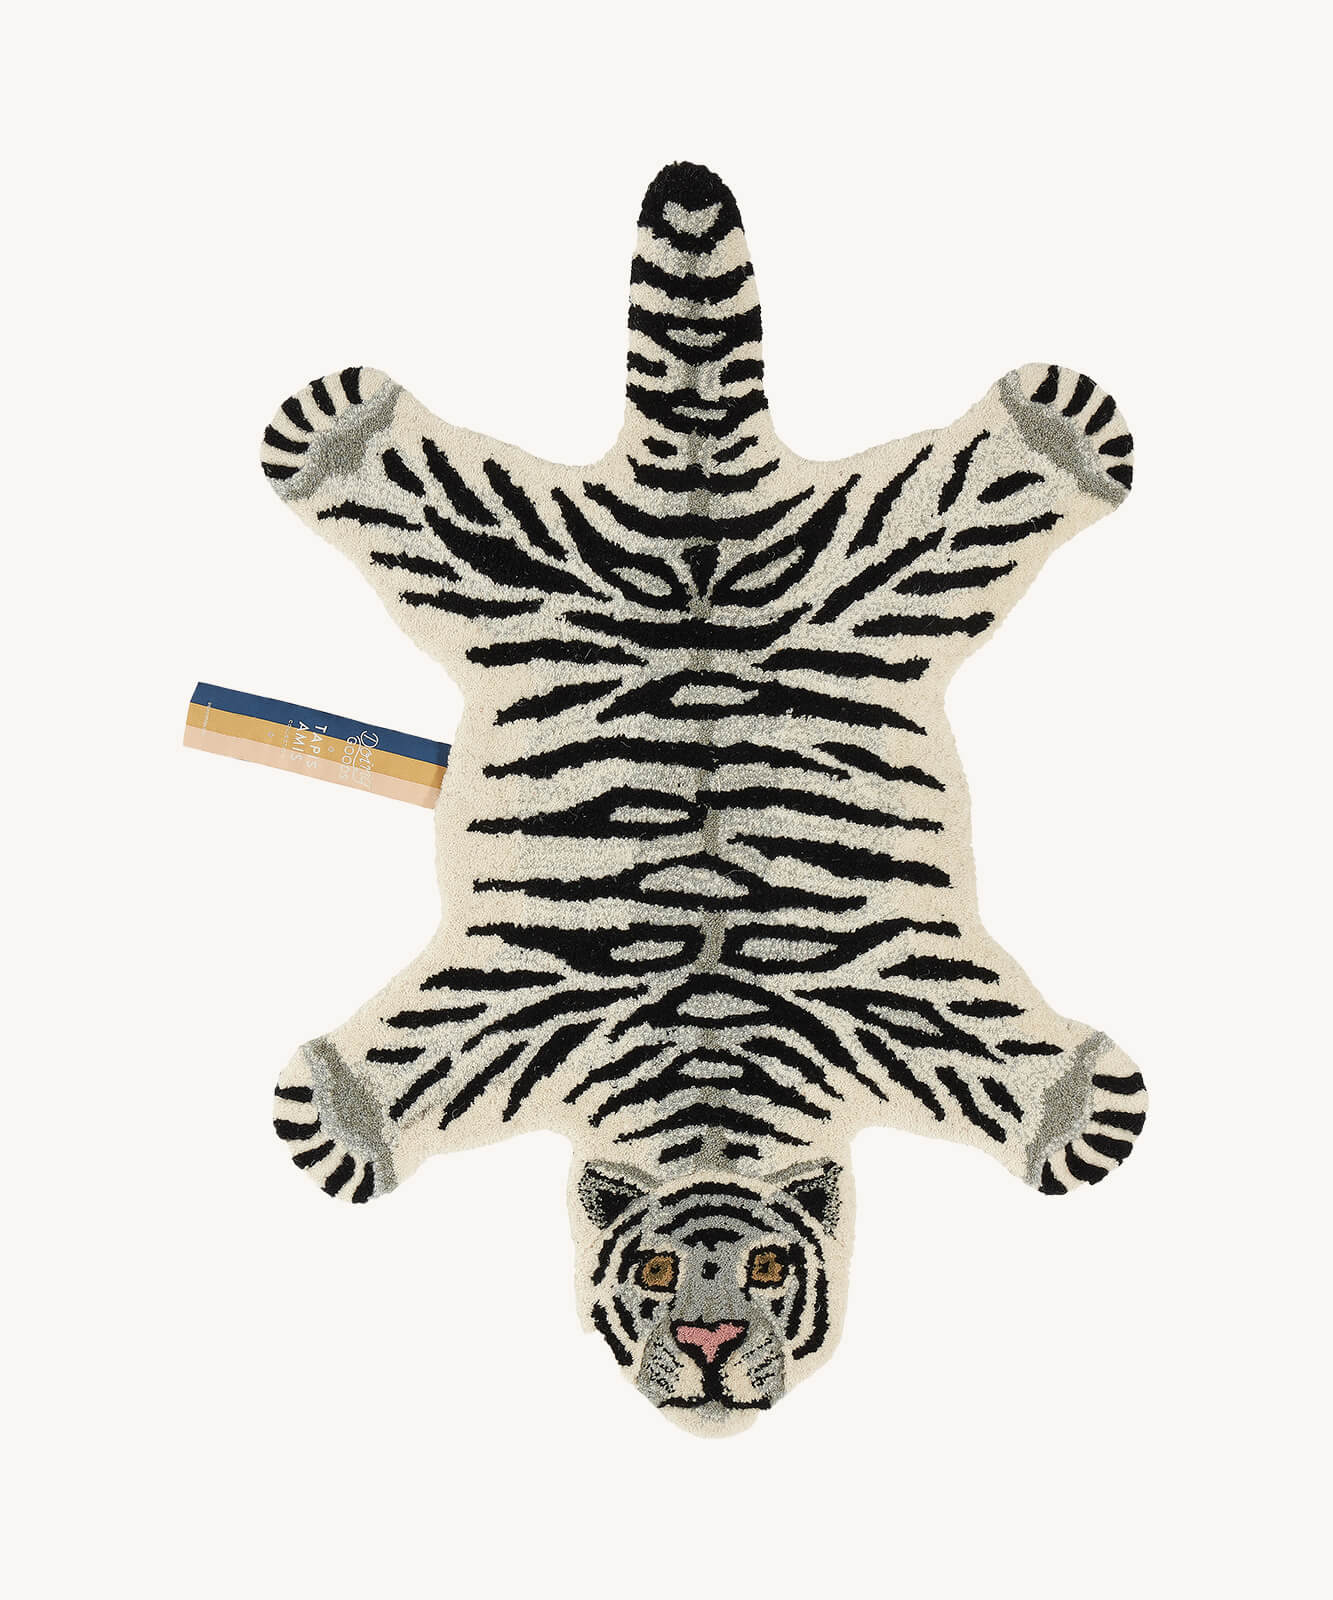 Doing Goods Snowy Tiger Rug Small, 93 x 63 x 2 cm